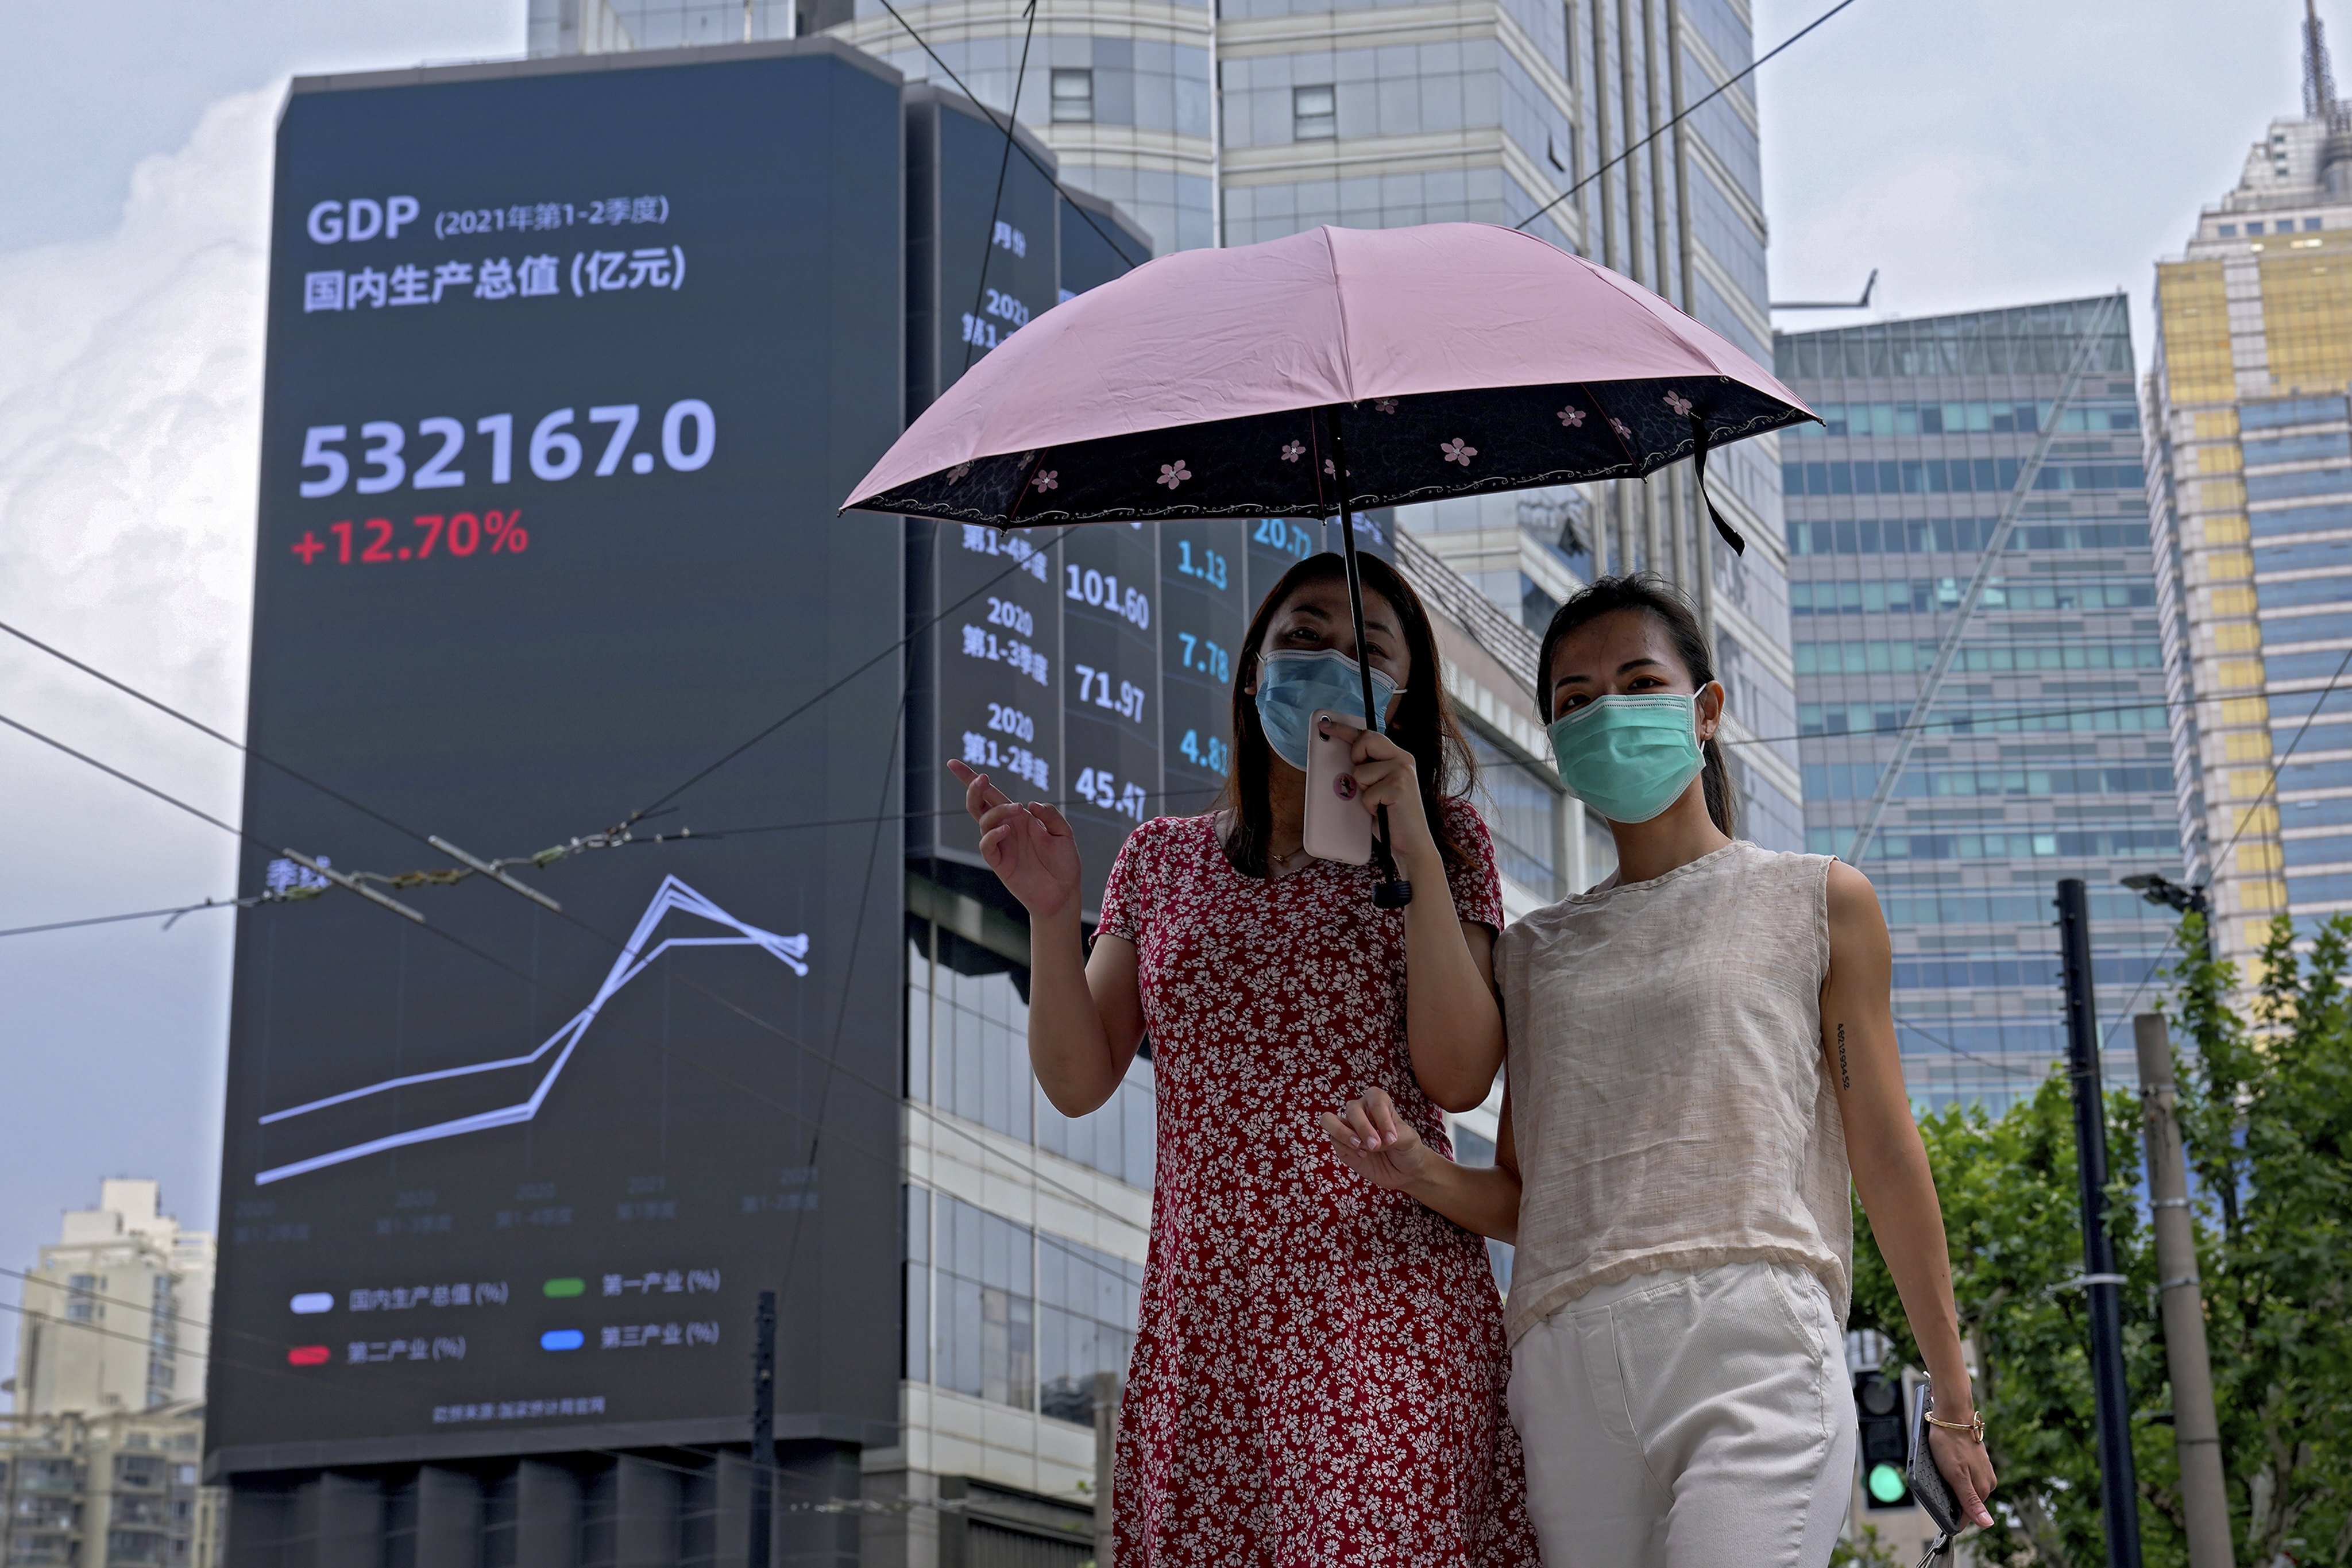 Women walk by an electronic billboard showing China’s GDP index on a commercial office building in Shanghai, on August 24. Photo: AP